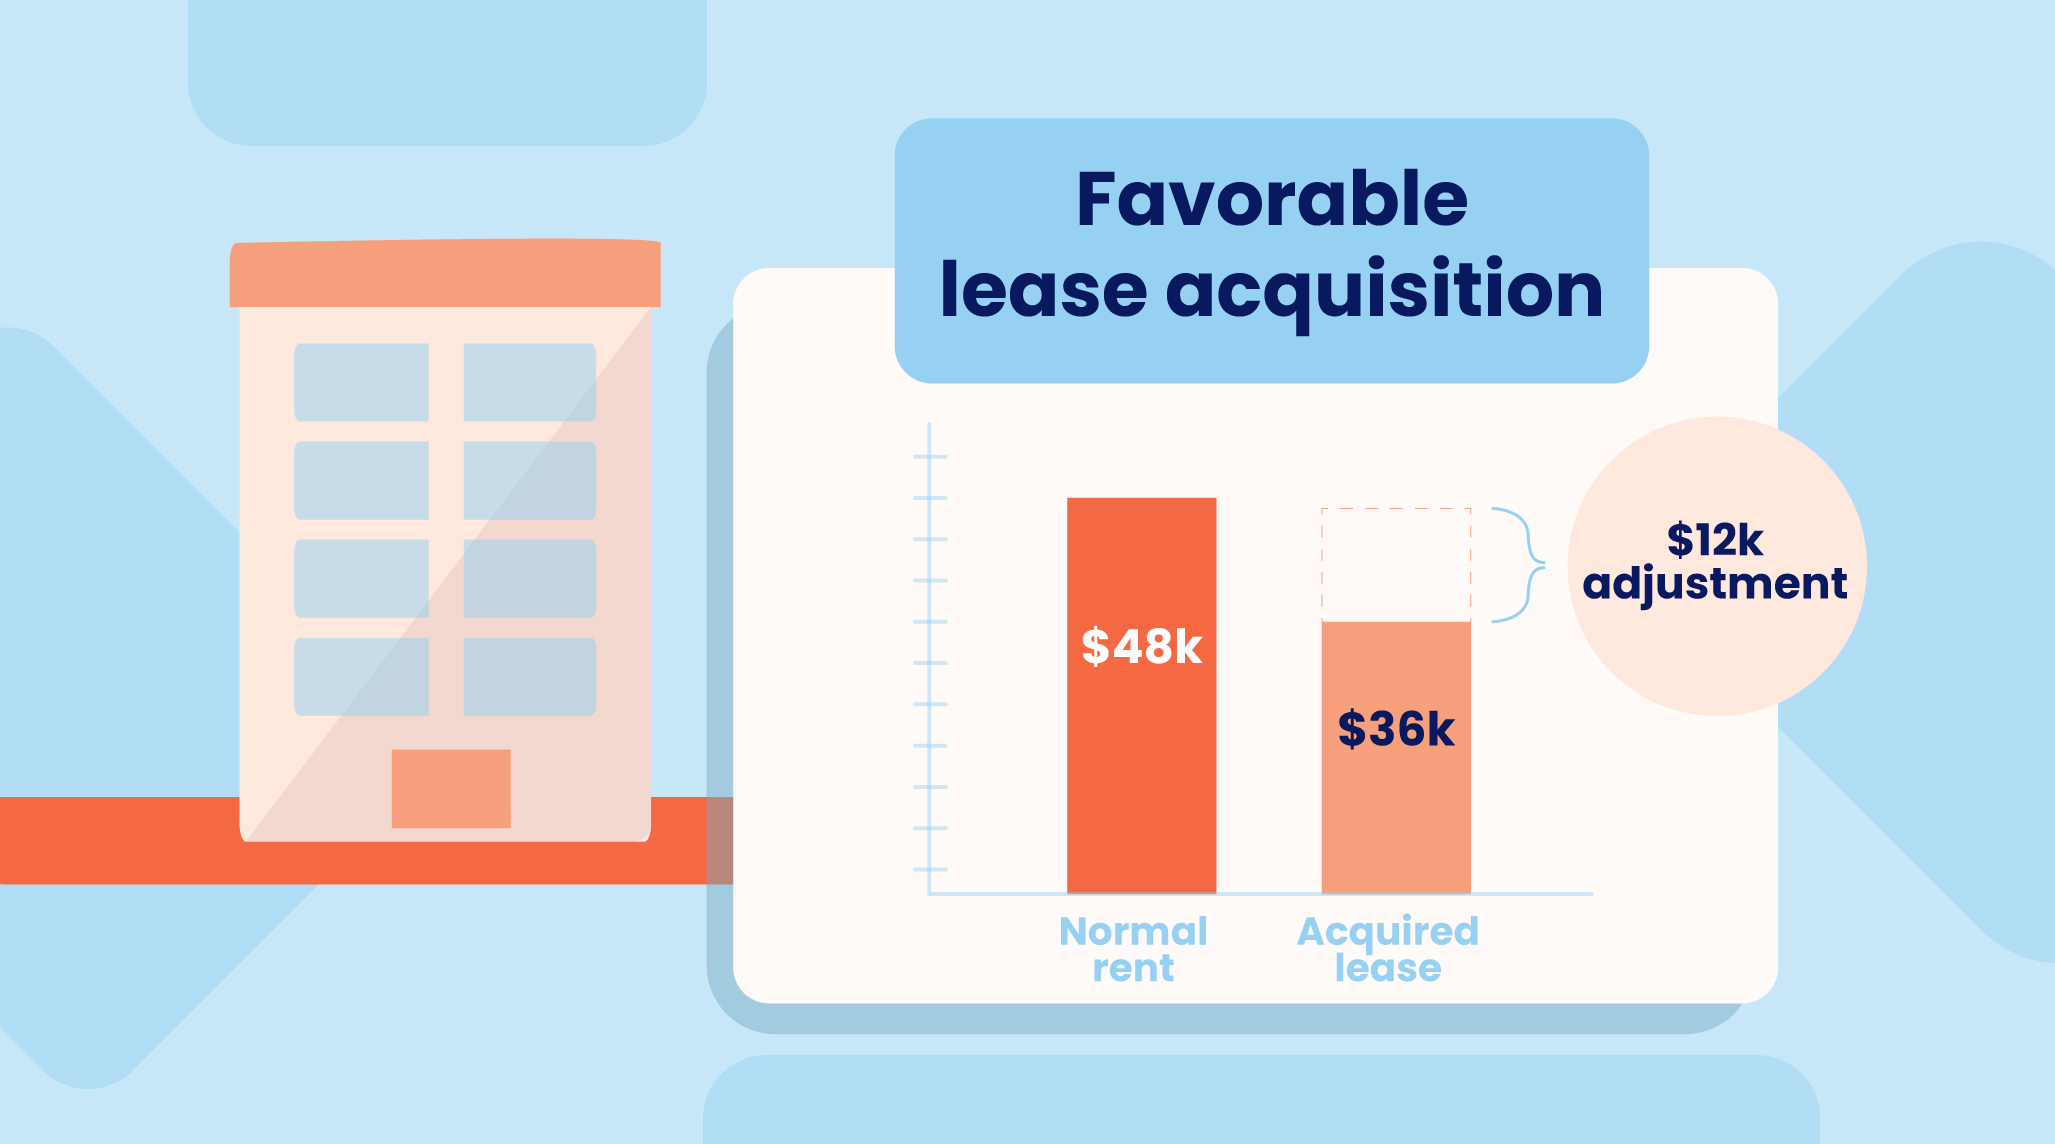 Image showing lease accounting as described in the paragraph above